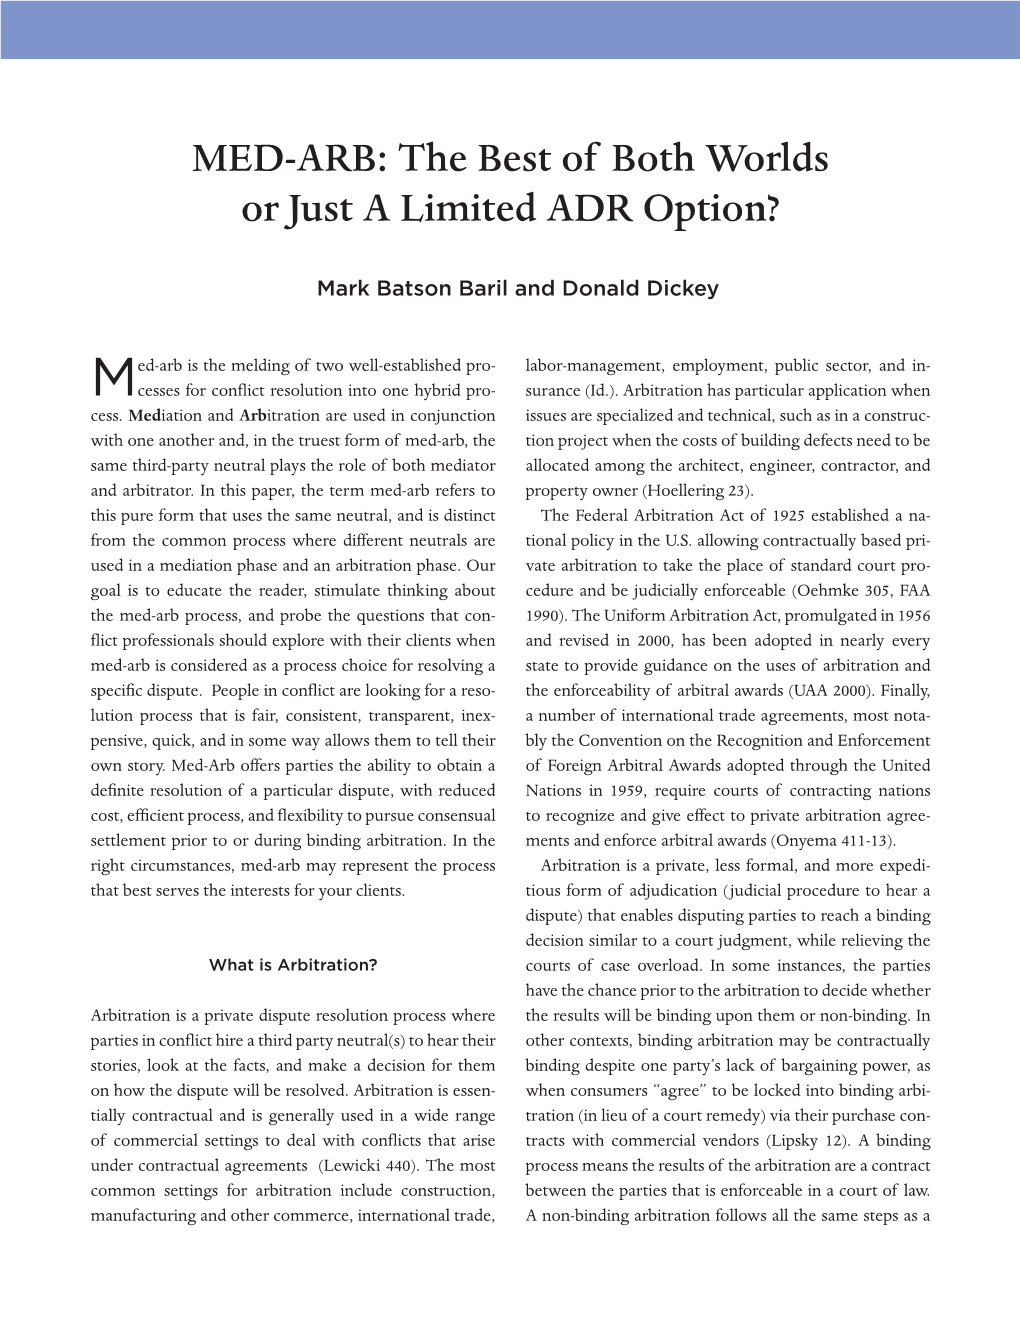 MED-ARB: the Best of Both Worlds Or Just a Limited ADR Option?